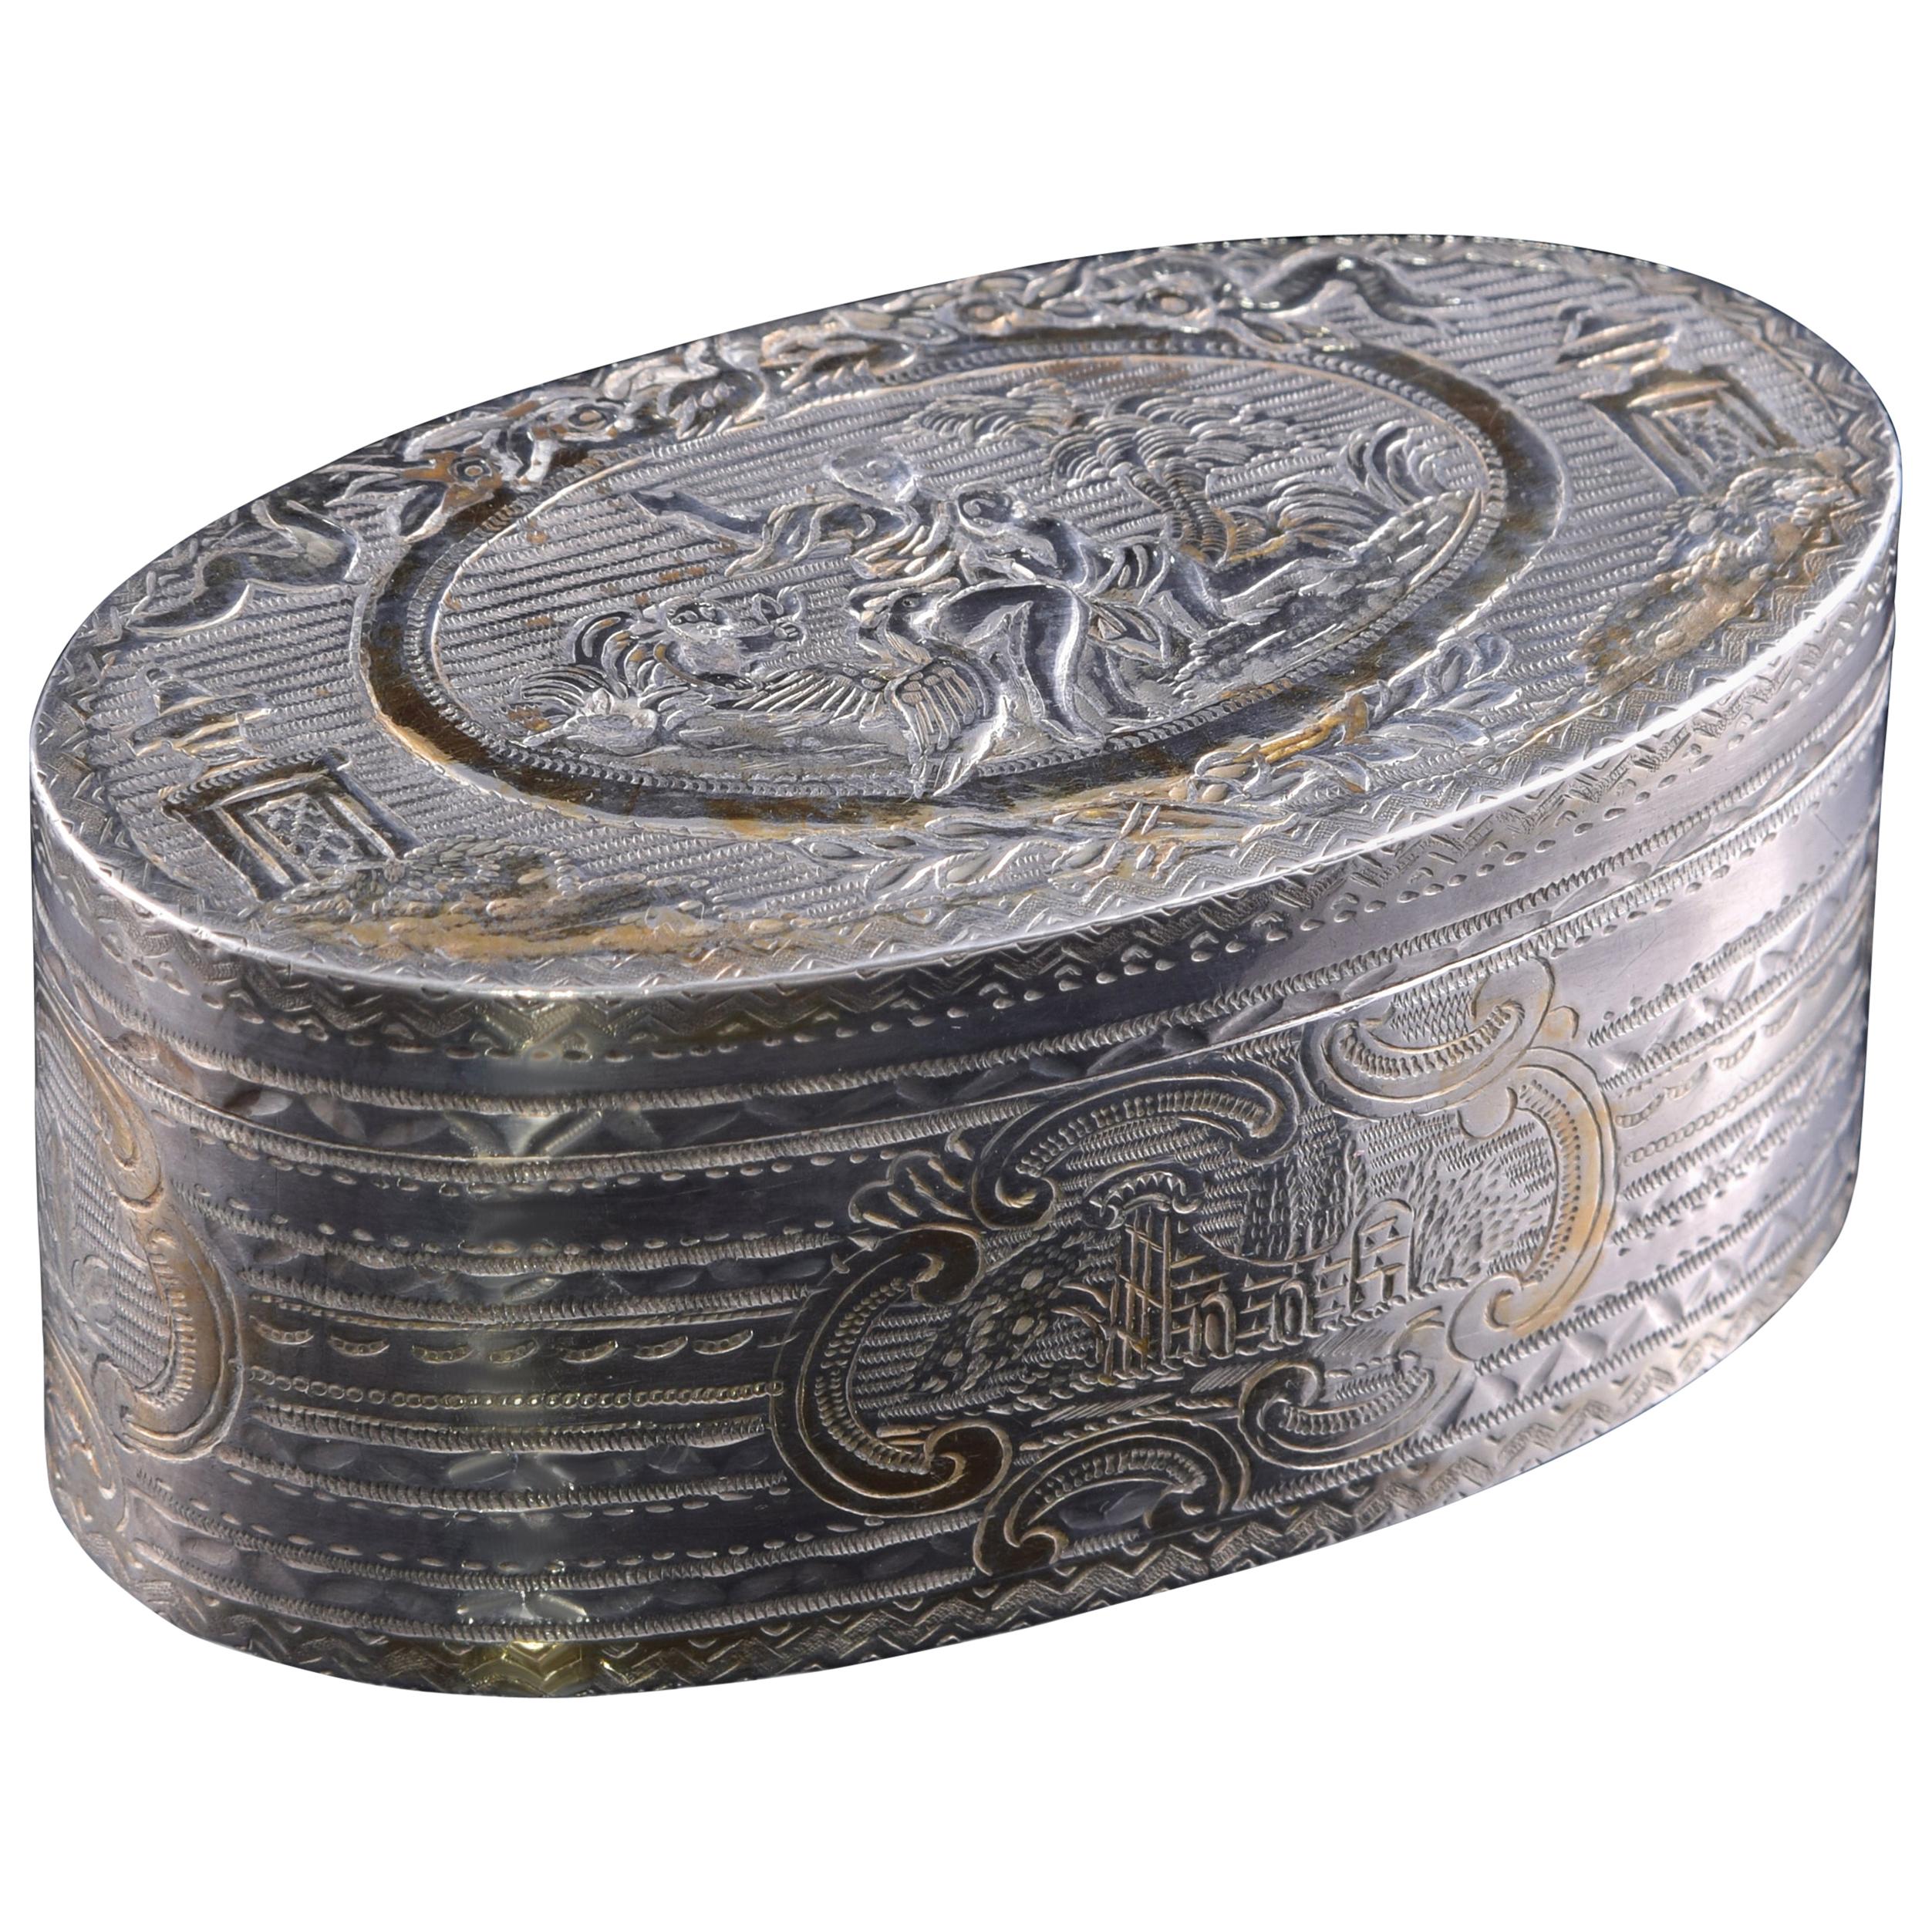 Silver Oval Box, 19th Century, with Hallmarks